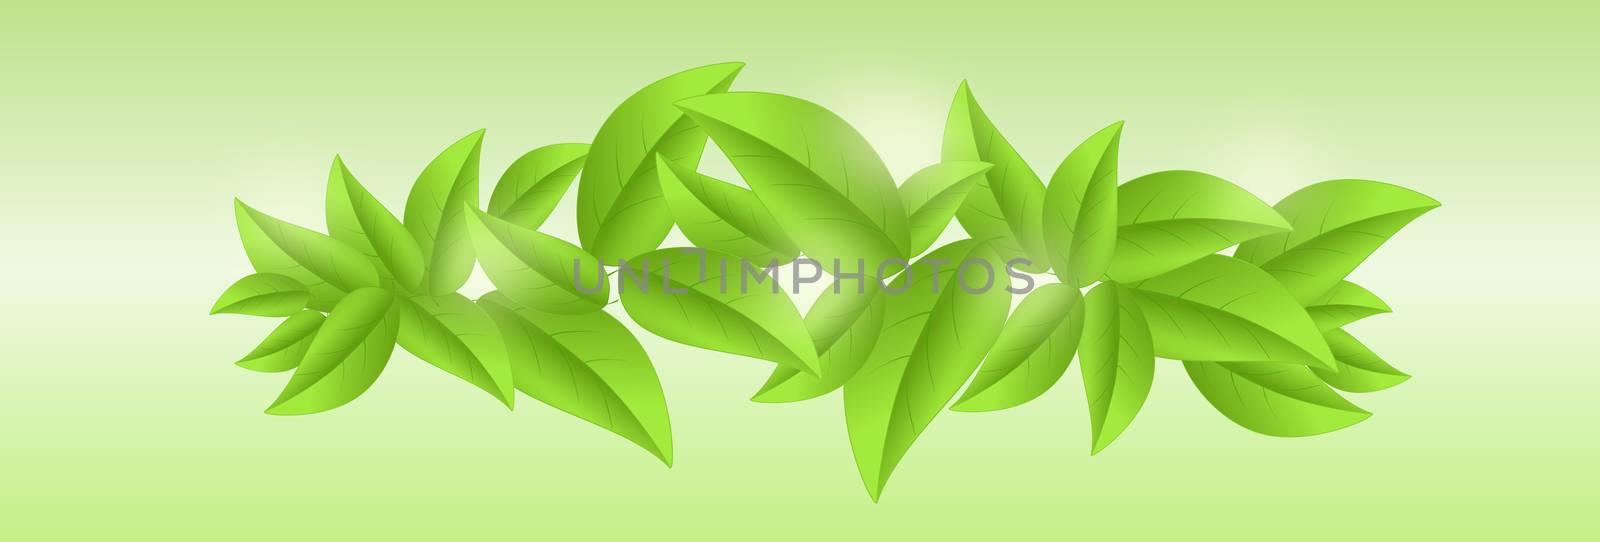 Fresh green leaves background with sunlights by sylwia